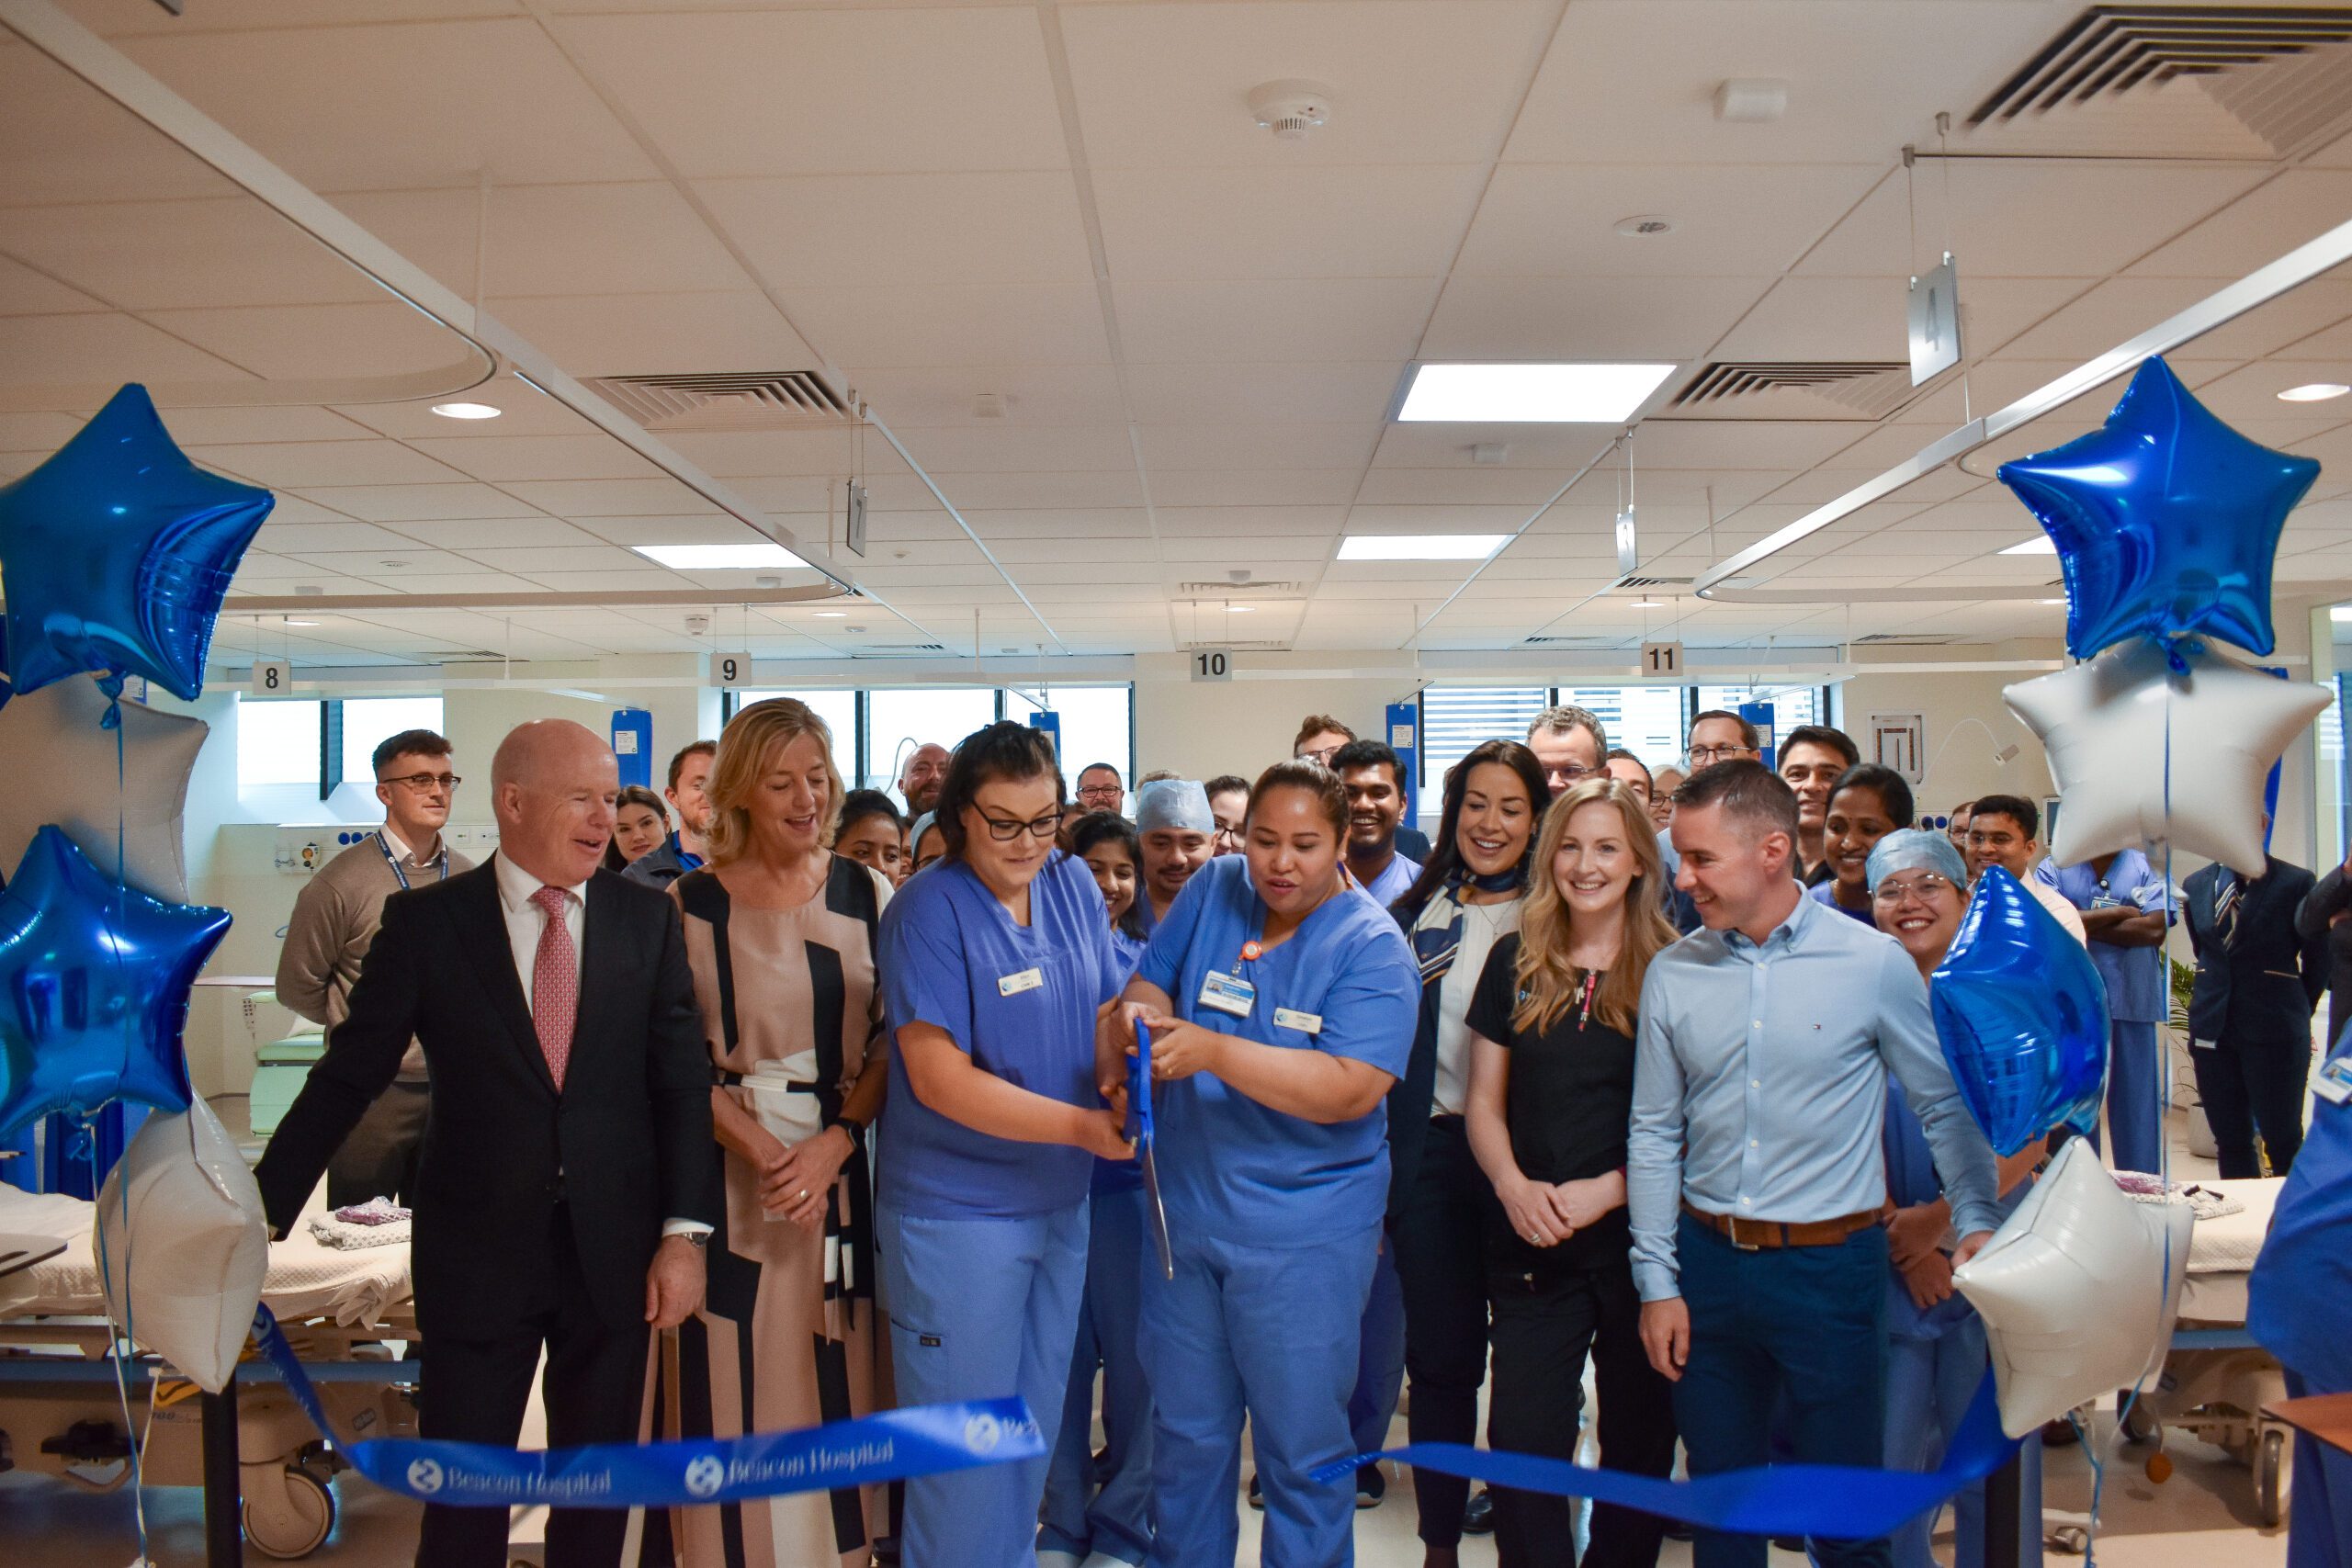 Cutting the Ribbon at the Opening of our New Cath Lab Admissions and Recovery Area